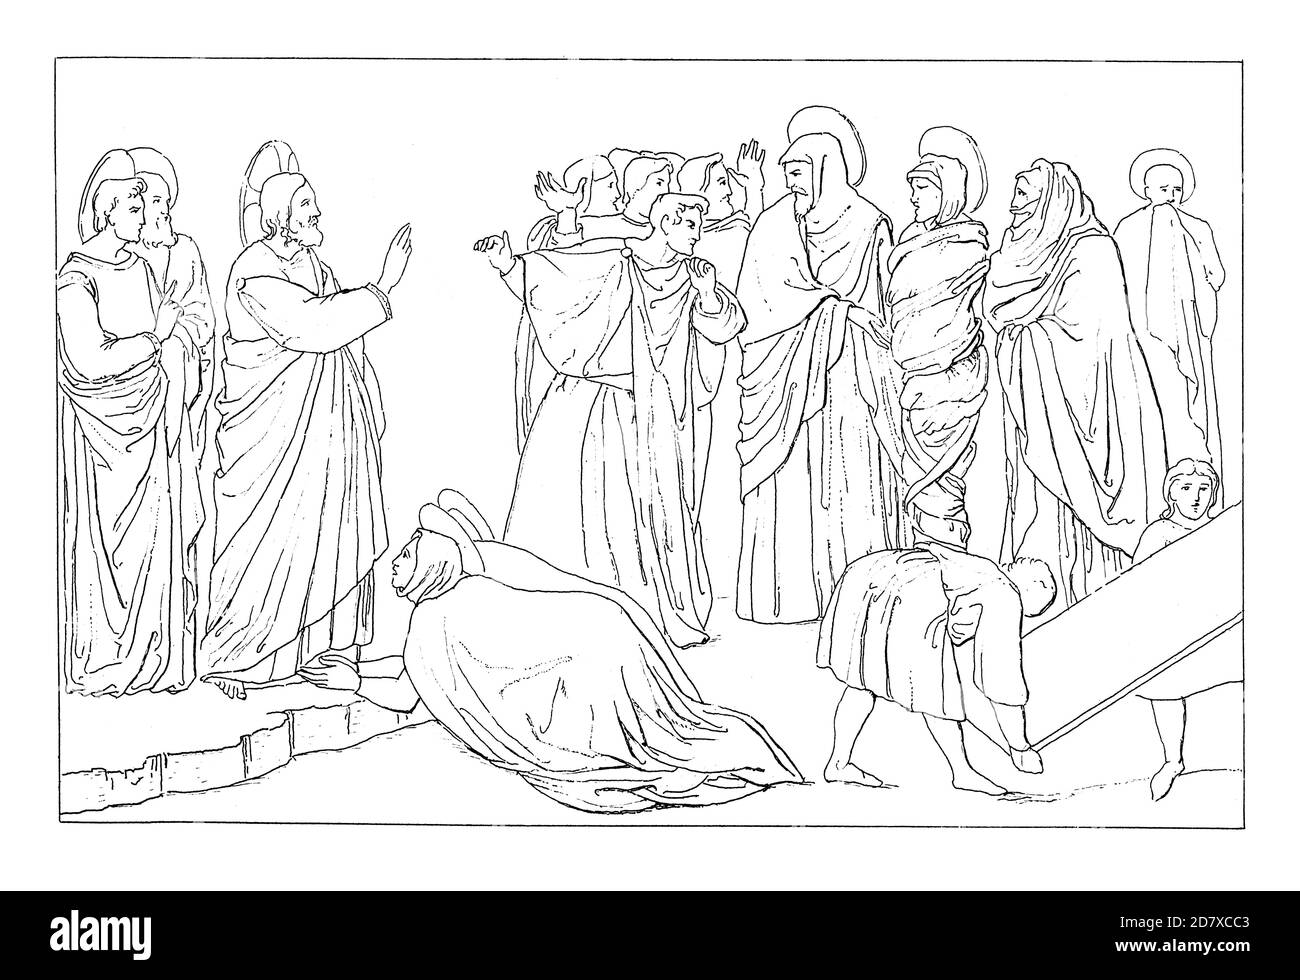 Antique 19th-century illustration depicting The Raising of Lazarus by Giotto in Scrovegni Chapel, Padua, Italy. Engraving published in Systematischer Stock Photo